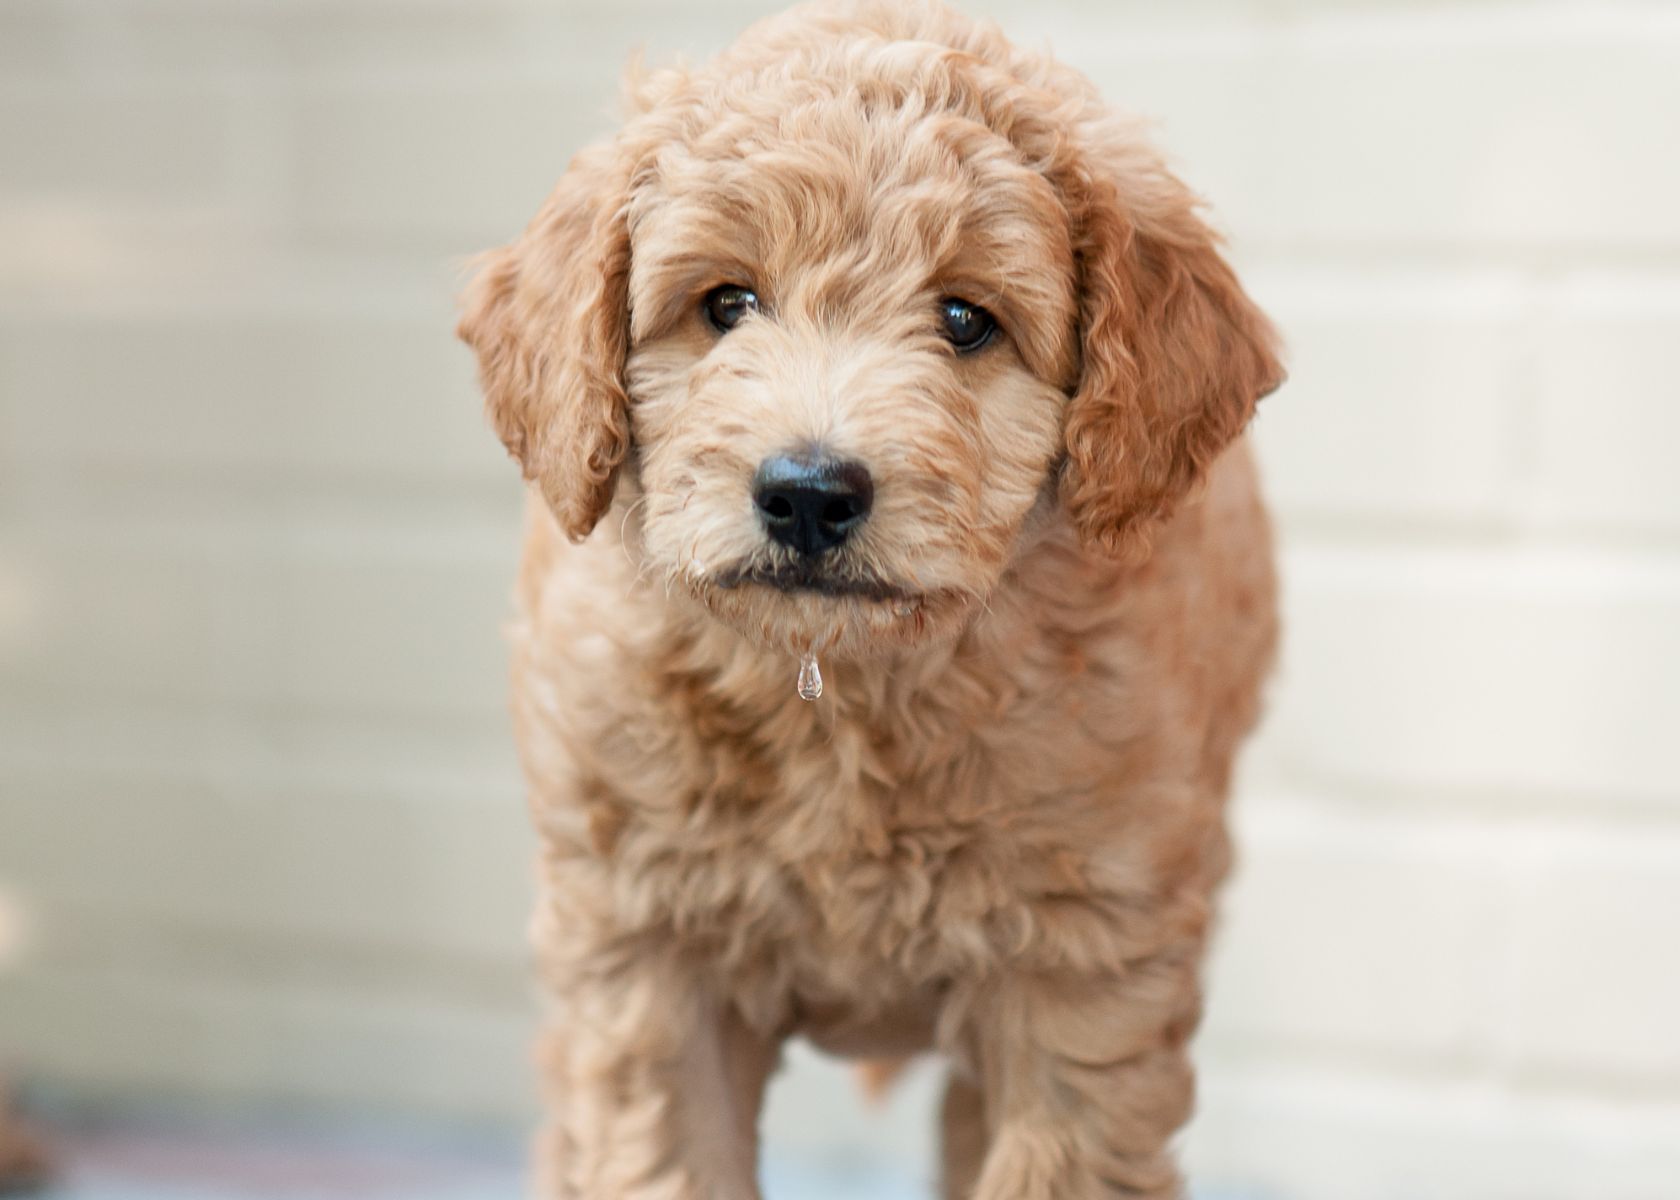 How to Increase Your Mini Goldendoodle's Lifespan?